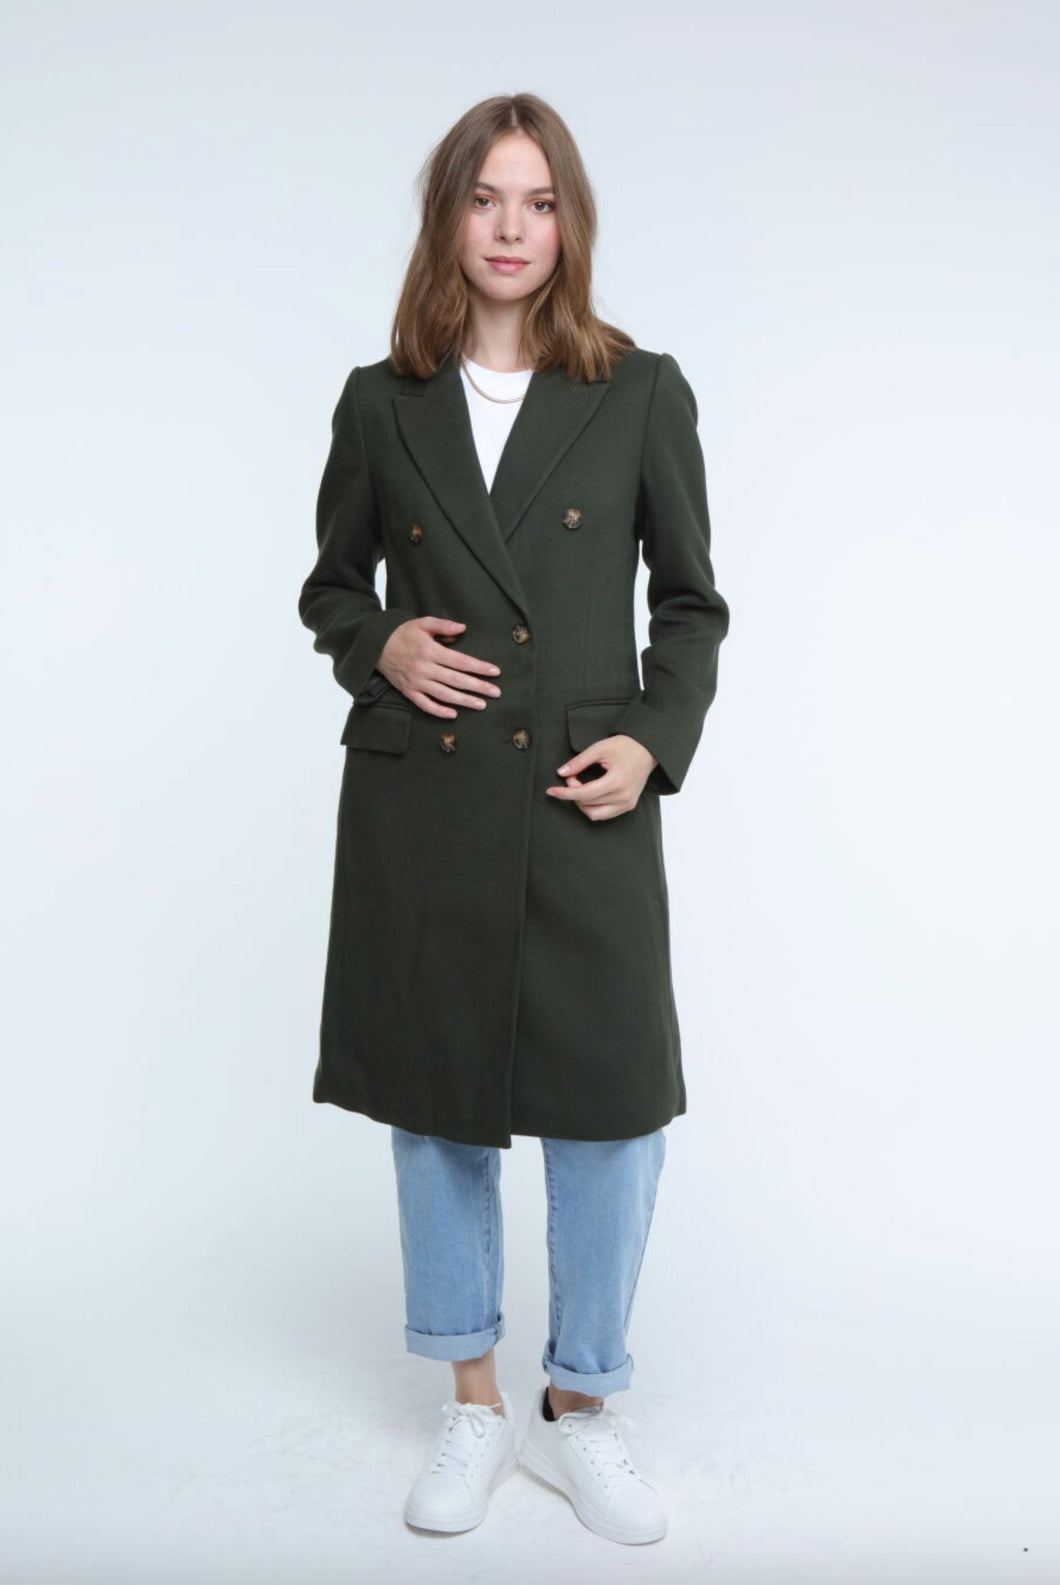 Elle Double Breasted Long  Coat in Green RRP £179